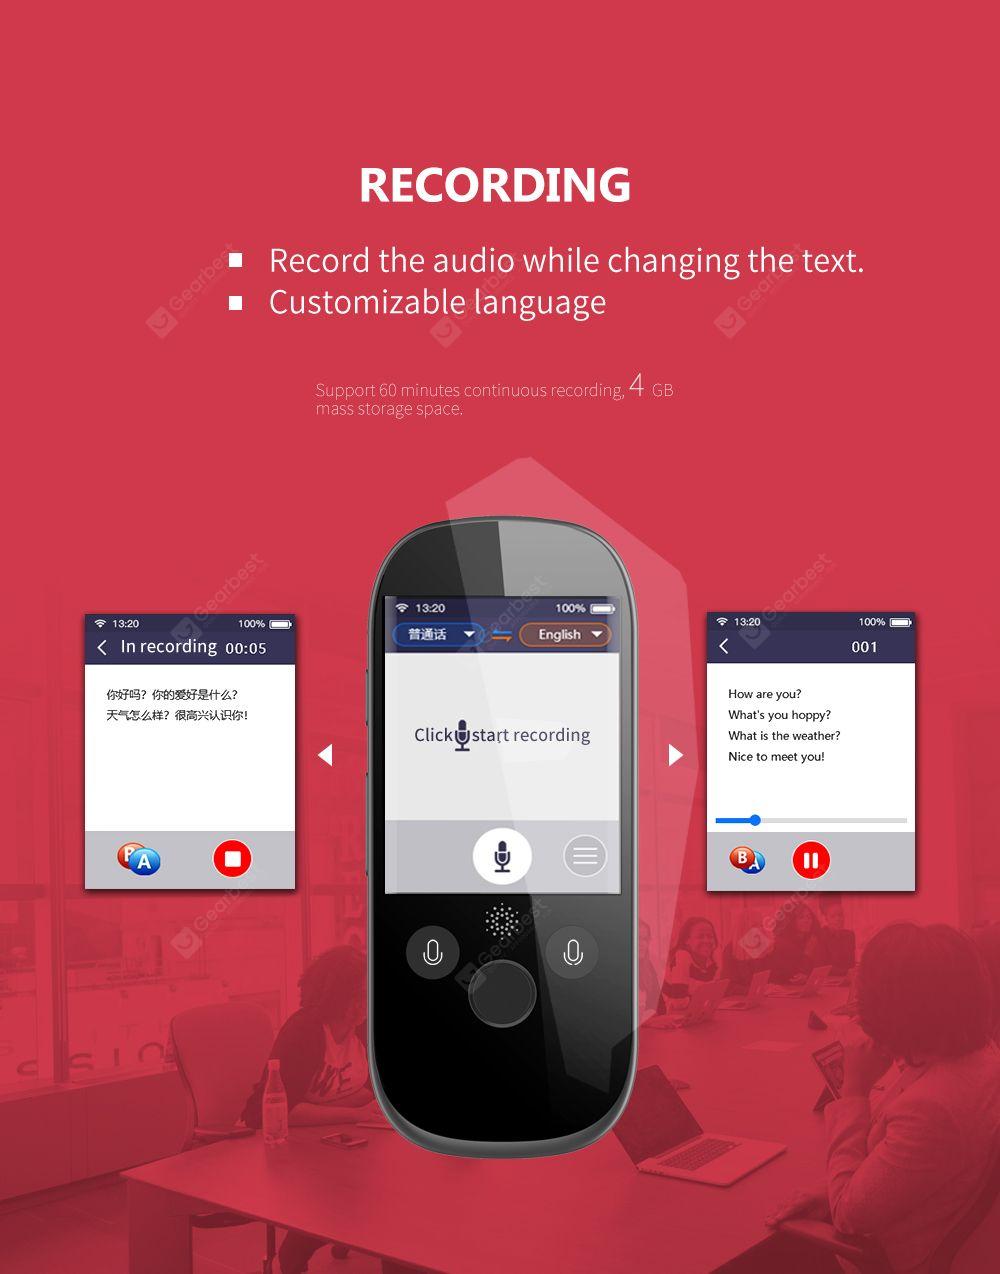 Boeleo K1 Pro 75 Languages Support / 60 Minutes Recording / 5 Offline Translation 2.4 inch AI Touch Control Voice Translator- Gray